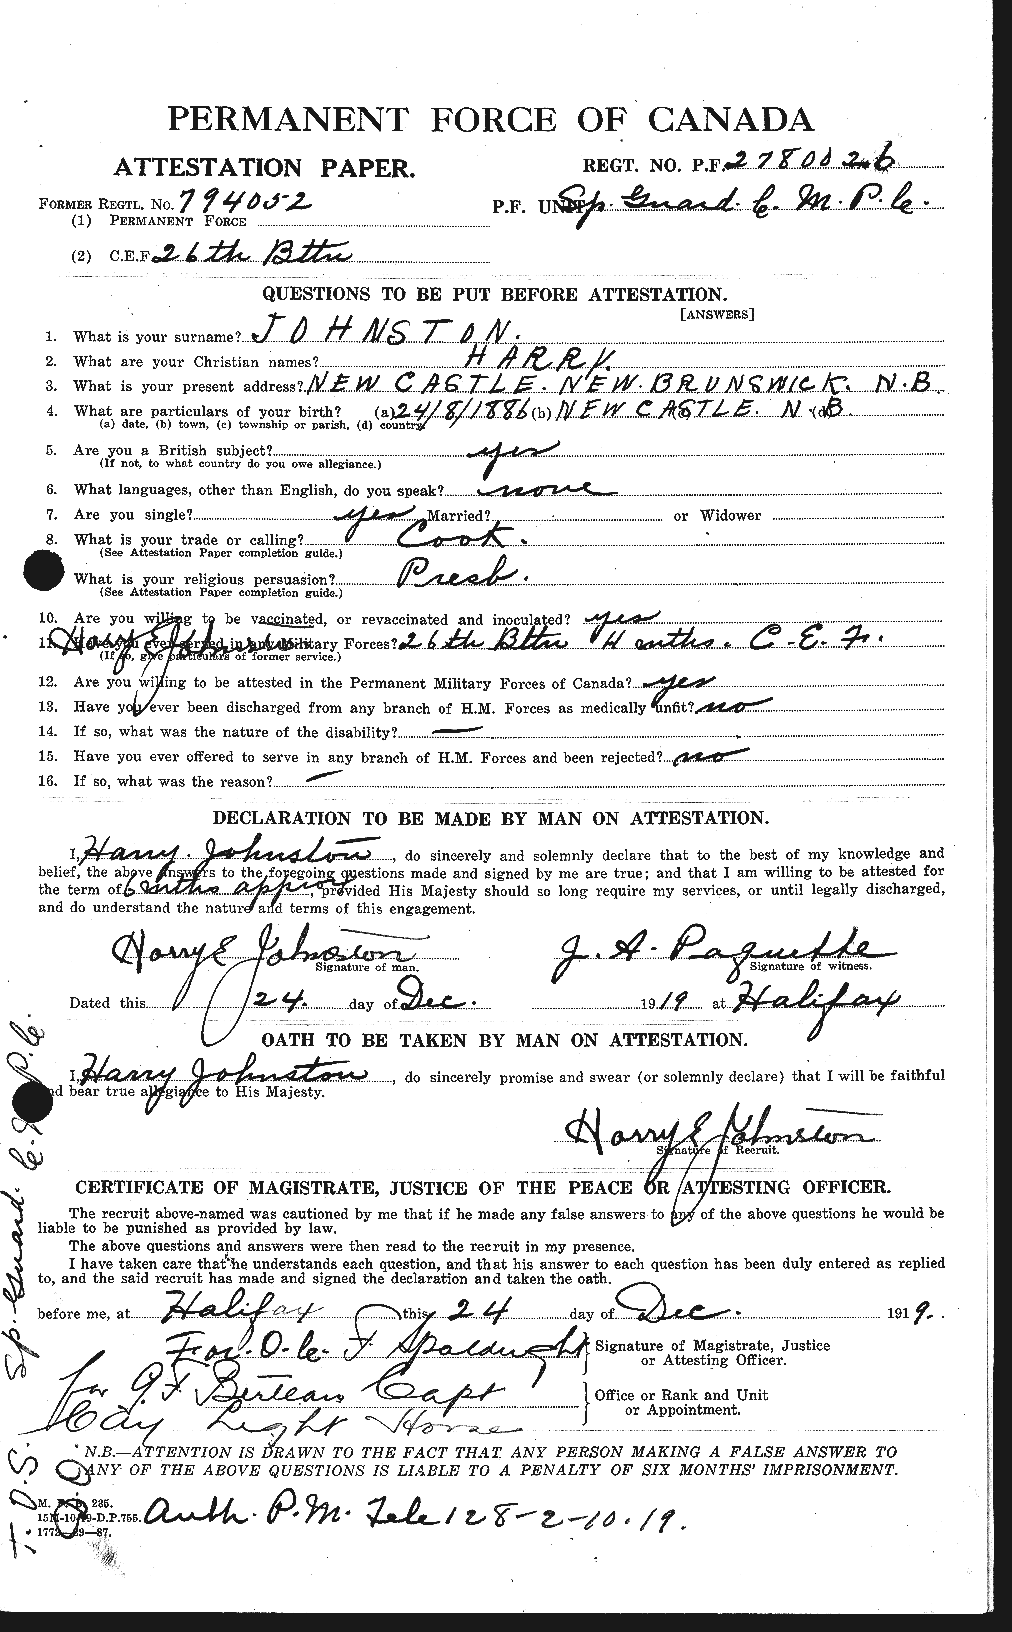 Personnel Records of the First World War - CEF 419501a